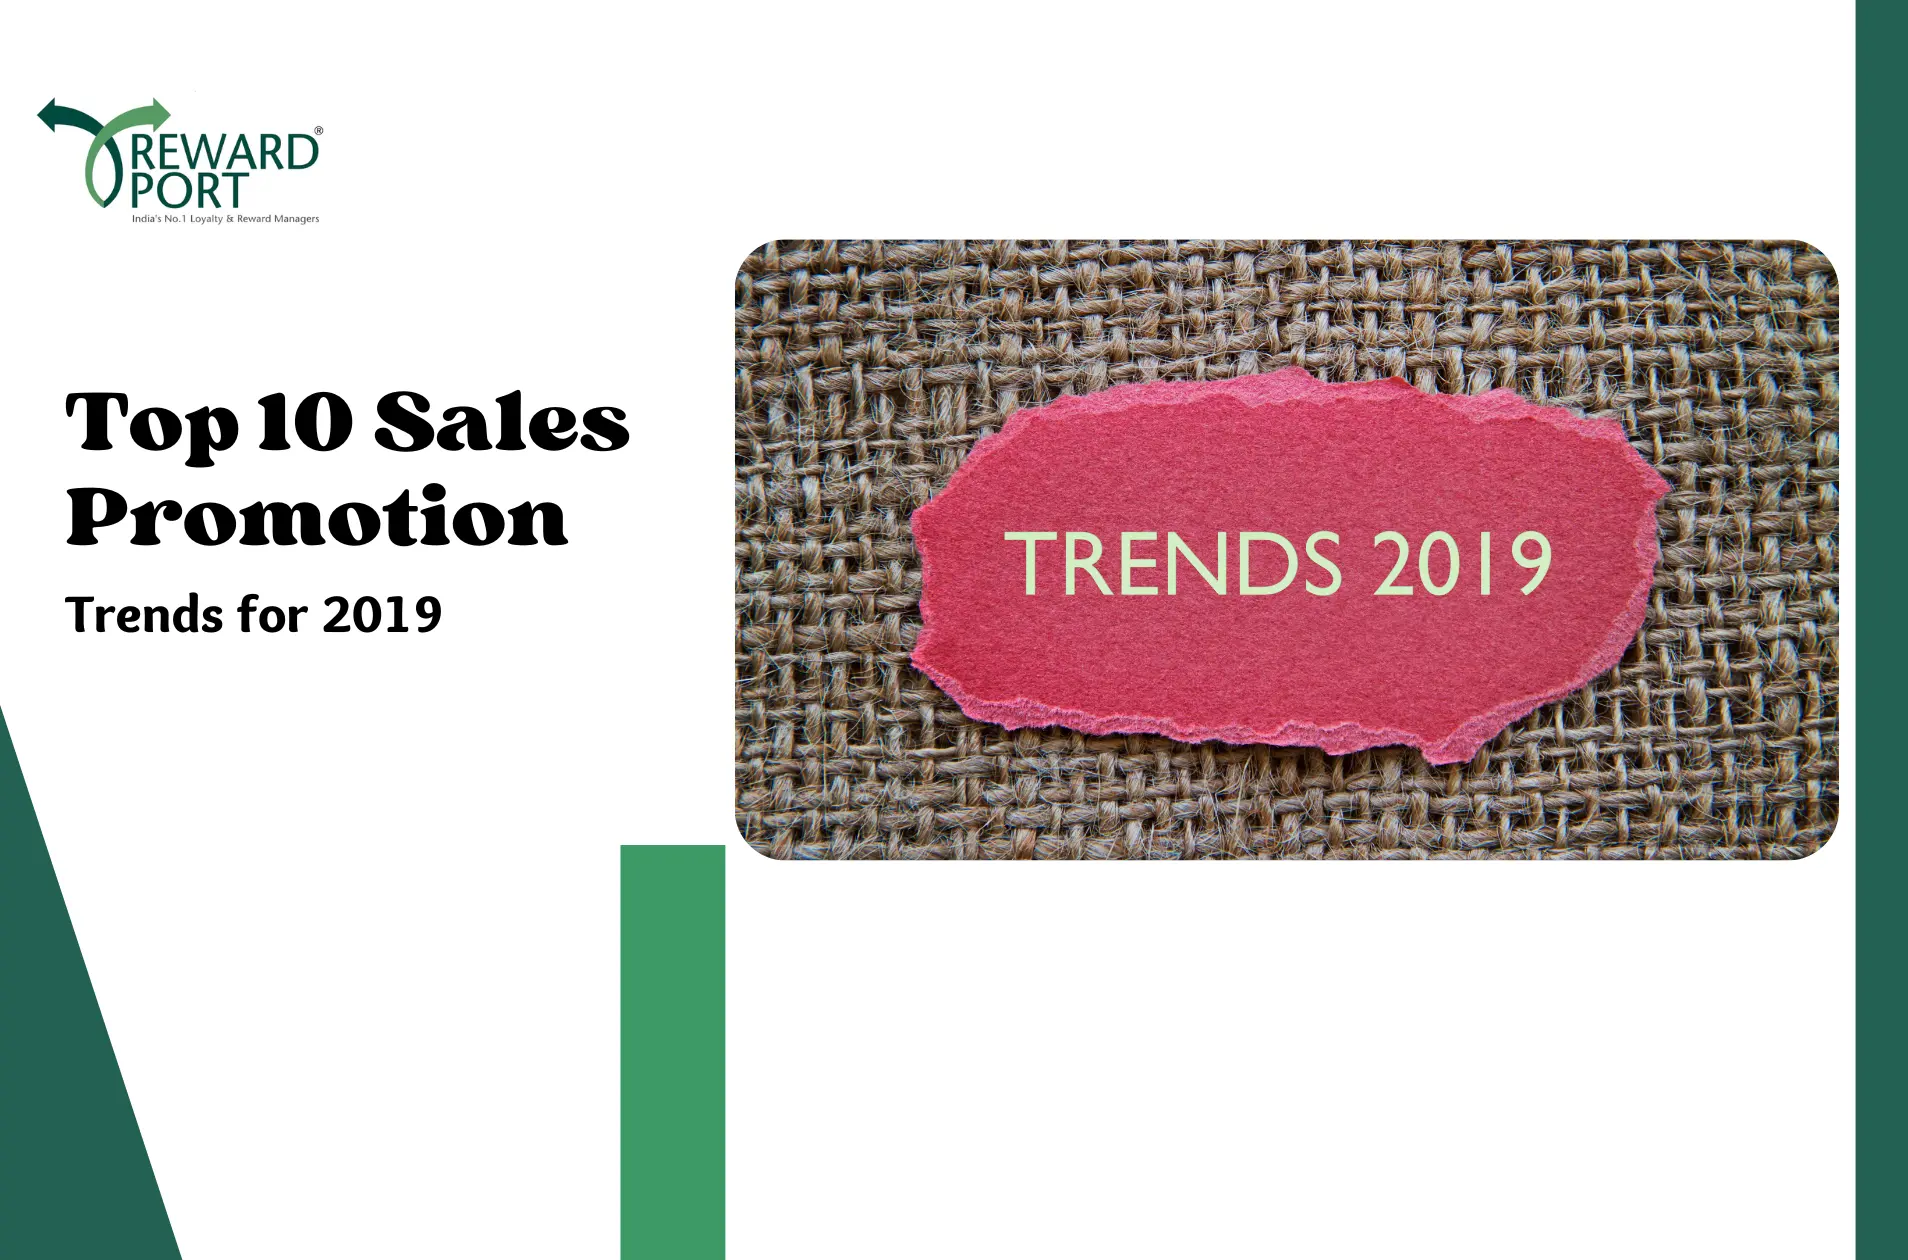 Top 10 Sales Promotion Trends for 2019